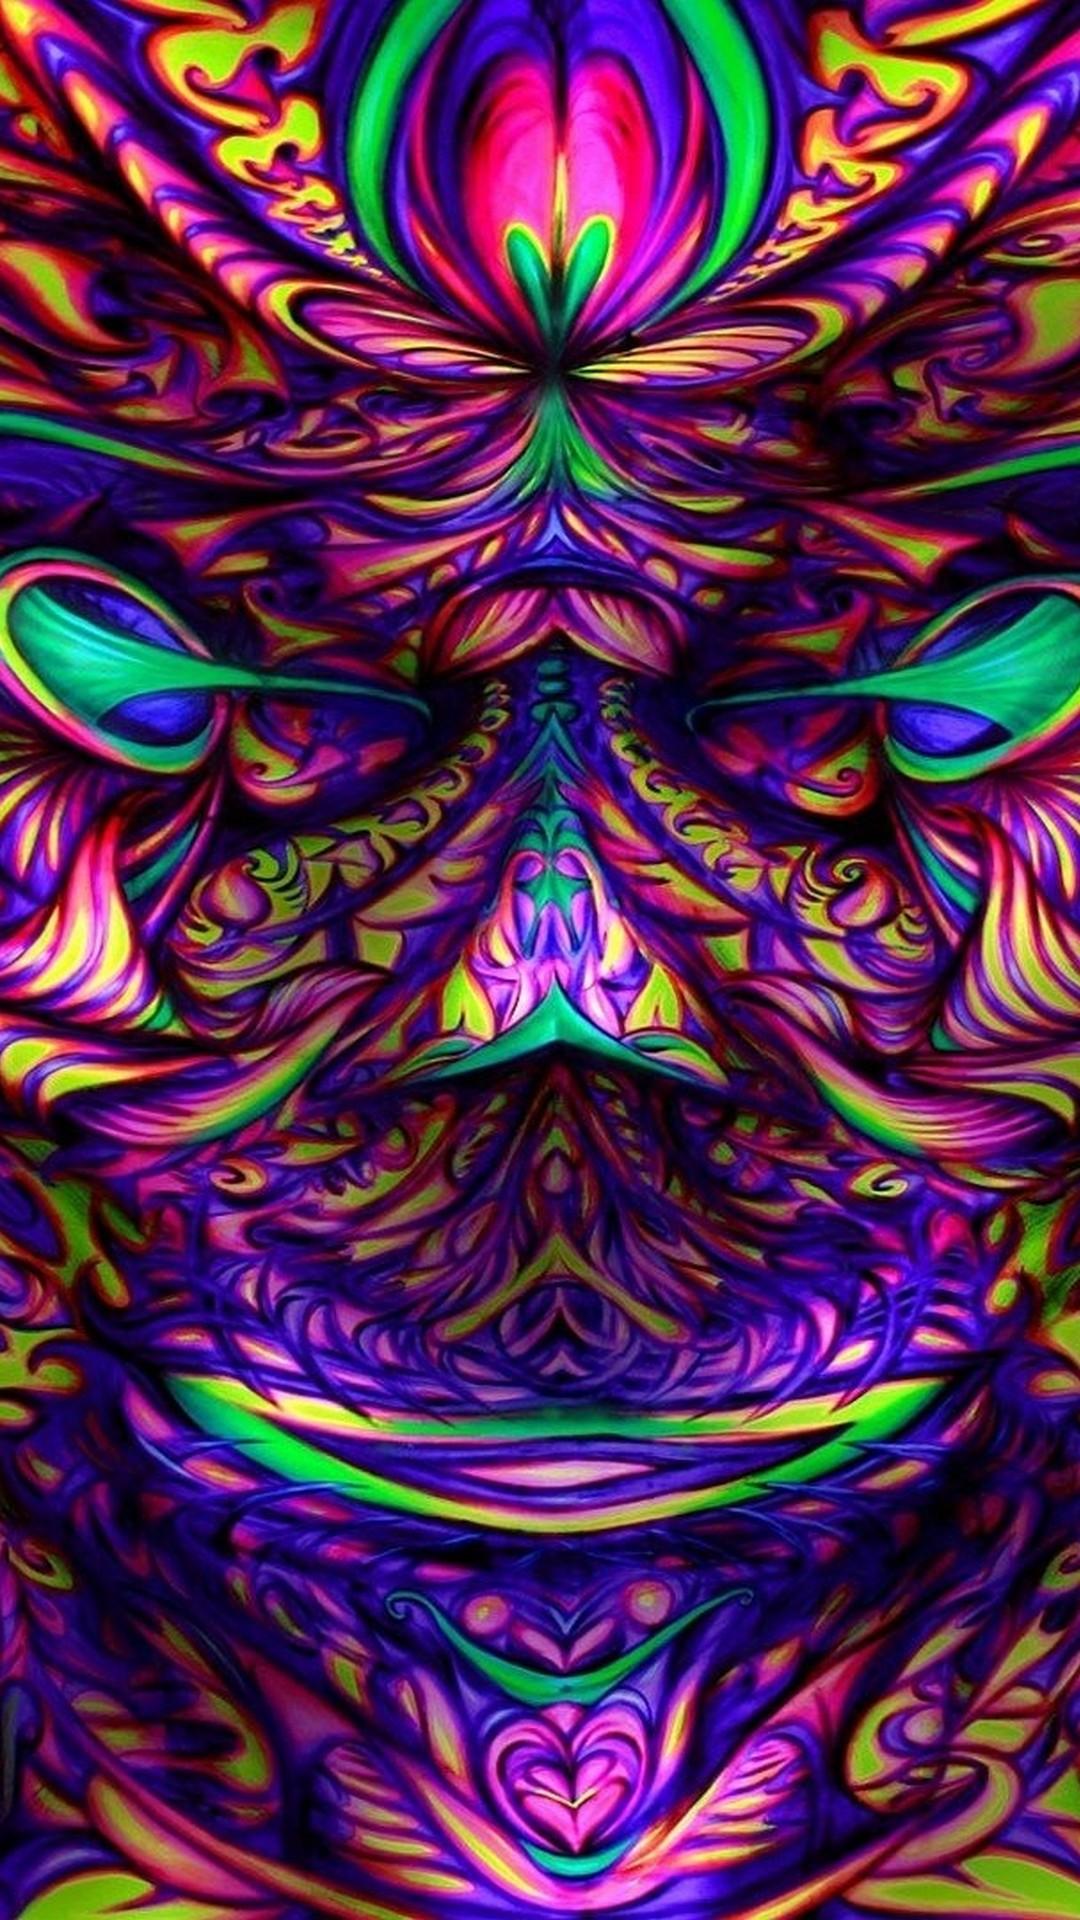 Trippy wallpapers for iphone Group 70